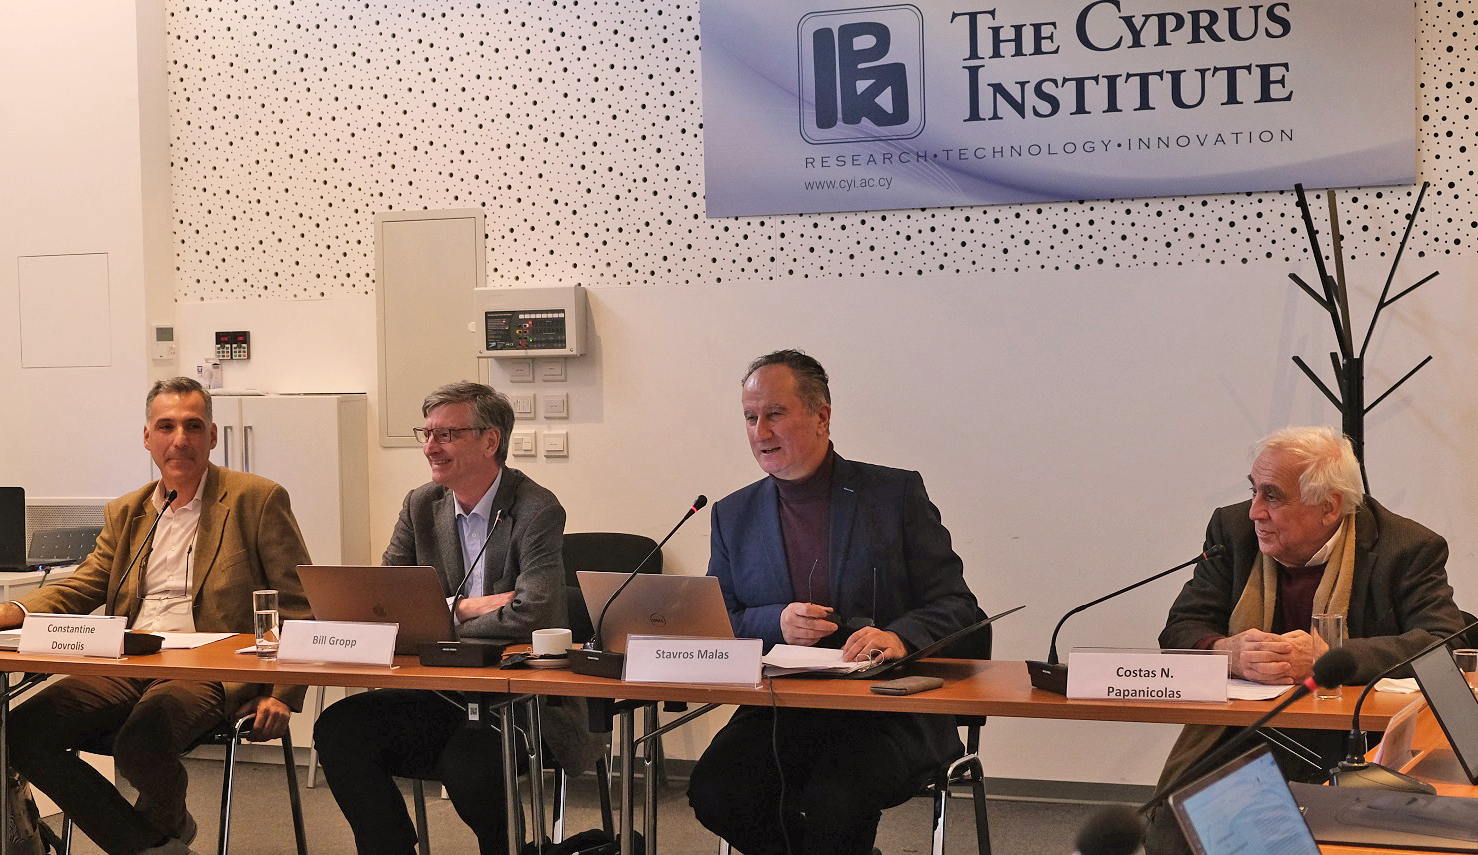 From left to right: Constantine Dovrolis, director, CaSToRC; Bill Gropp, director, NCSA; Stavros Malas, president, The Cyprus Institute; Costas N. Papanicolas, professor and CEO, The Cyprus Research and Educational Foundation (CREF)